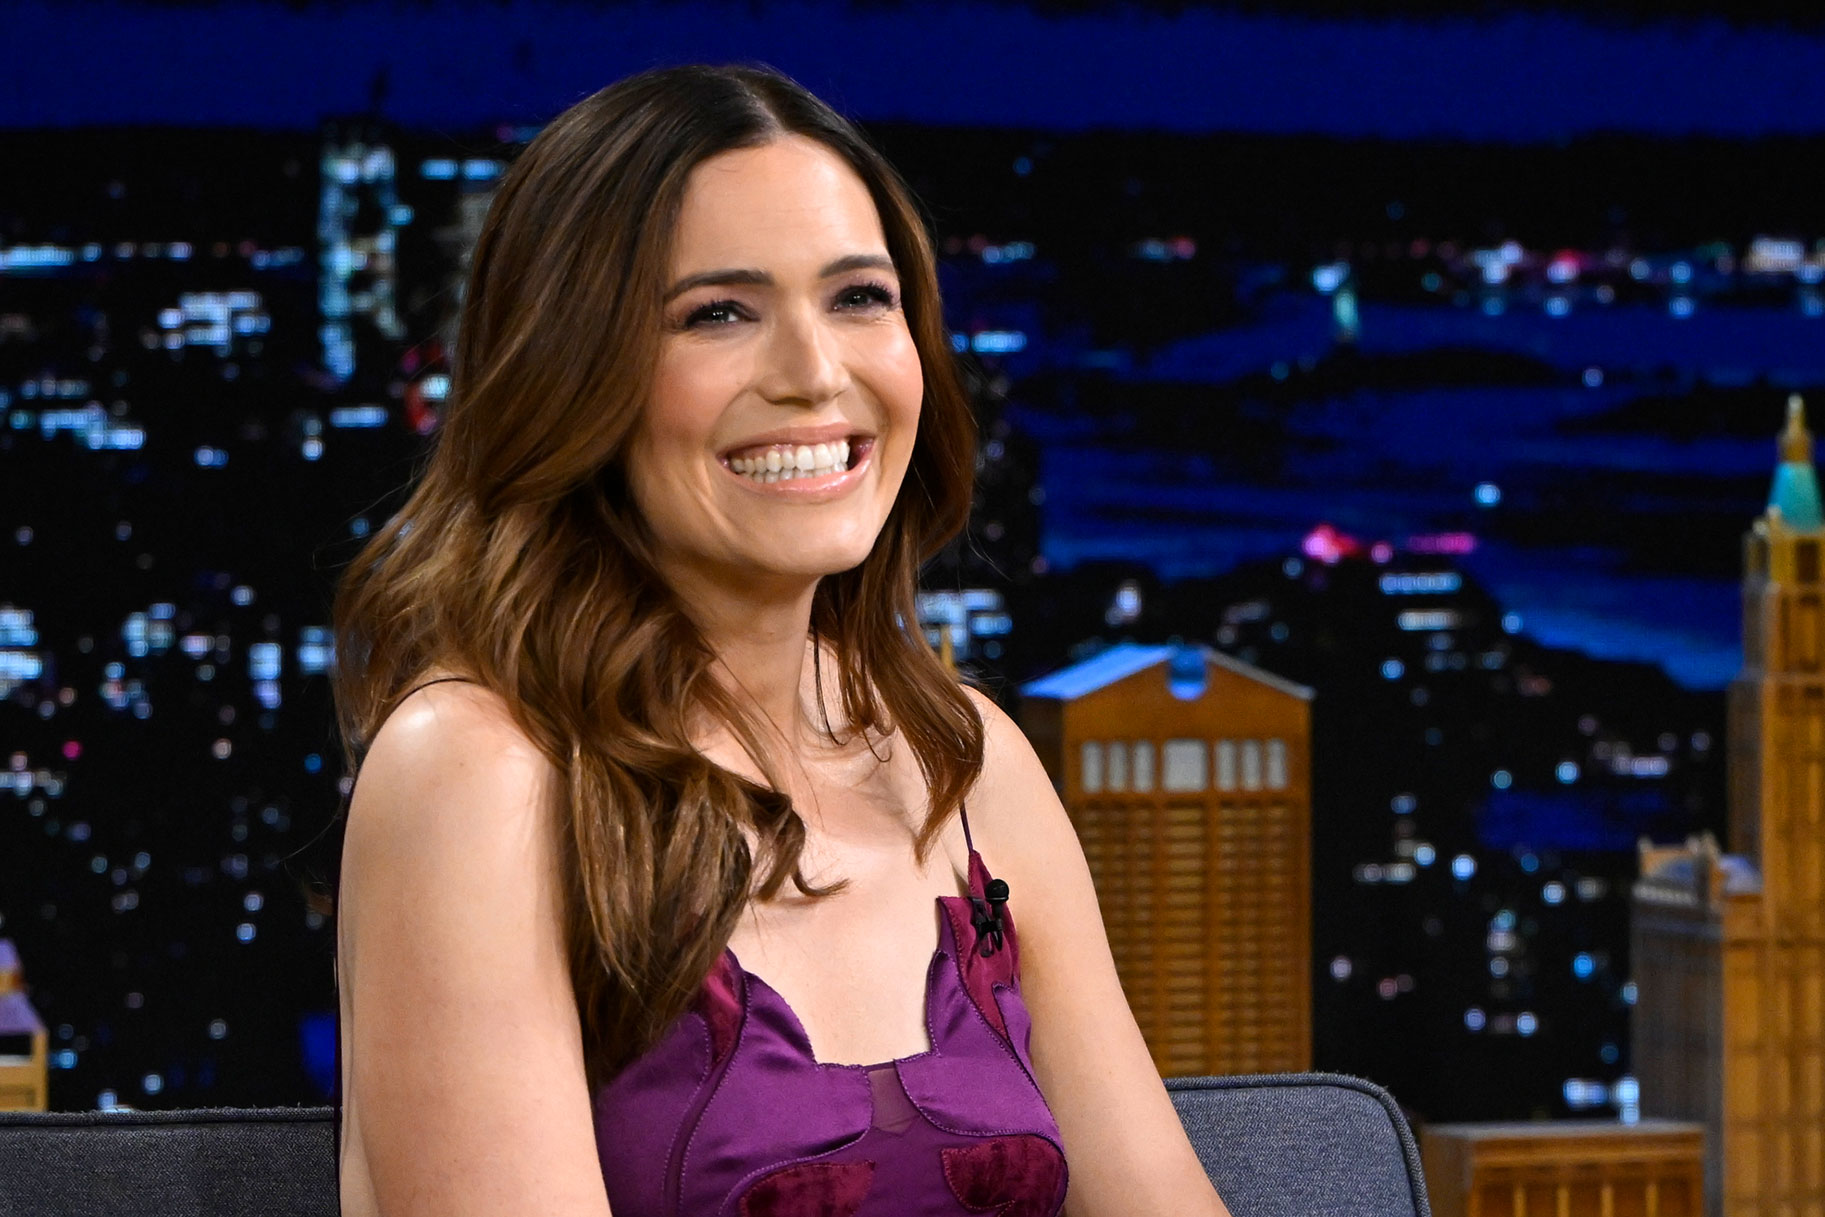 Mandy Moore On The Tonight Show